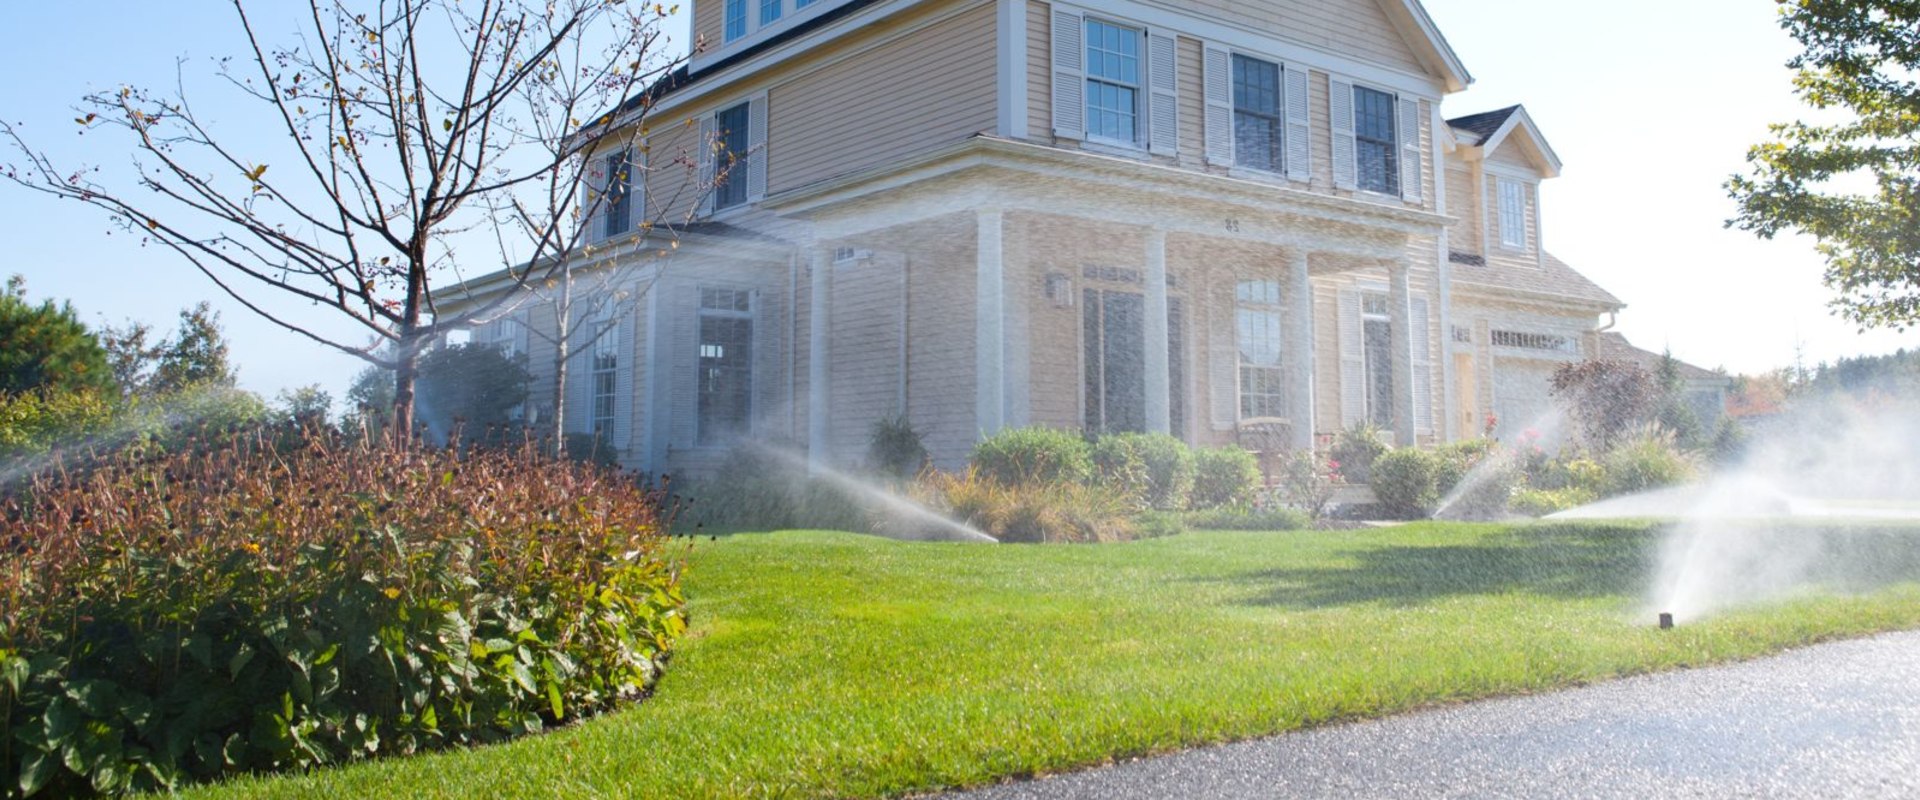 Protecting Your Investment: Winterizing Your Sprinkler System During Home Renovation In Northern VA